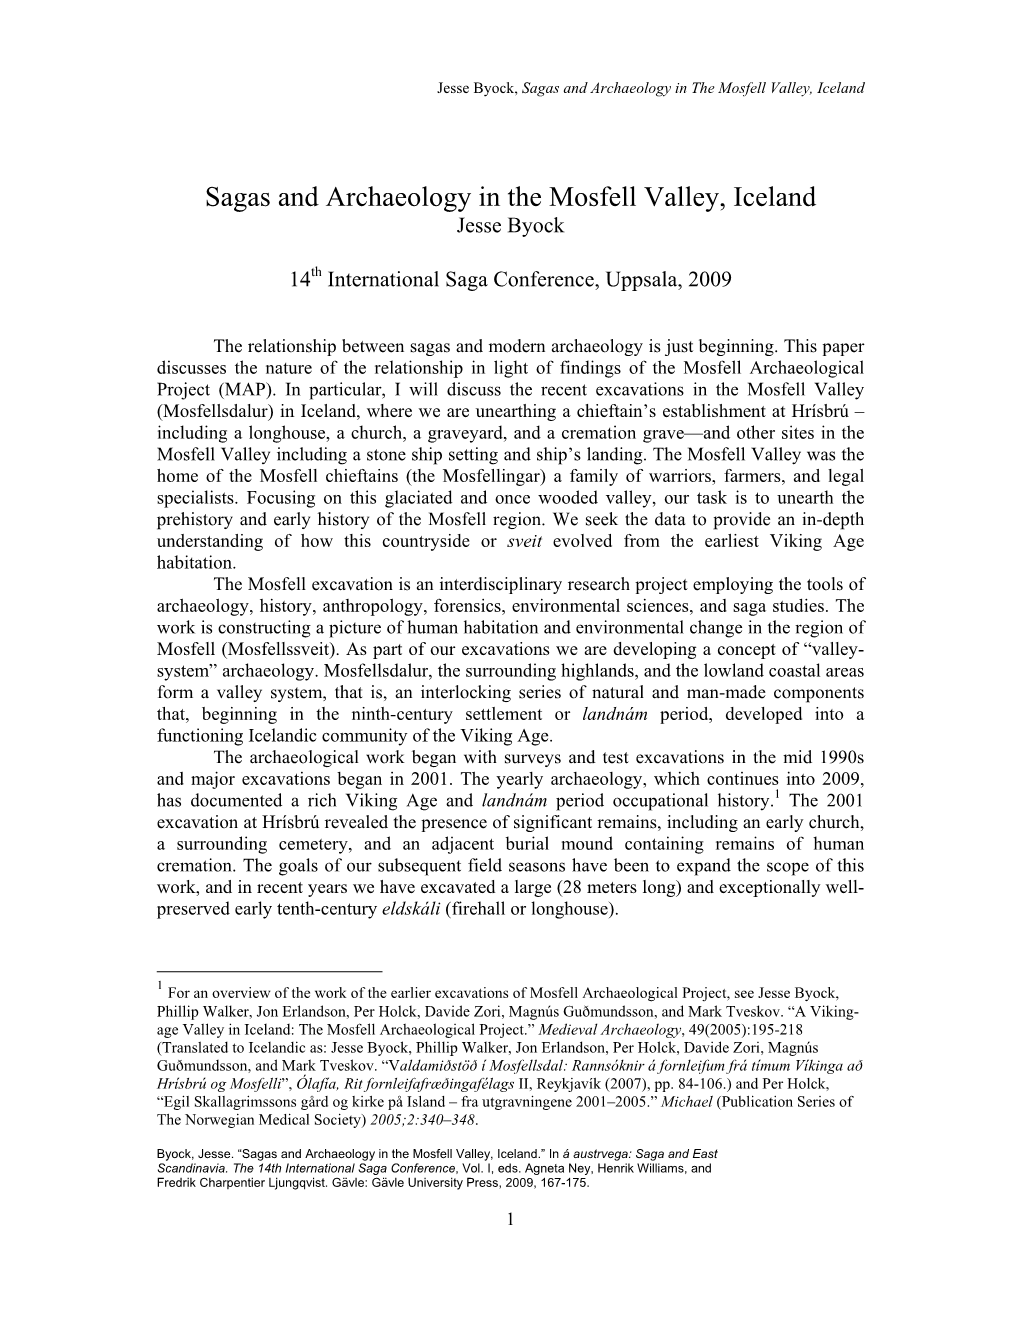 Sagas and Archaeology in the Mosfell Valley, Iceland